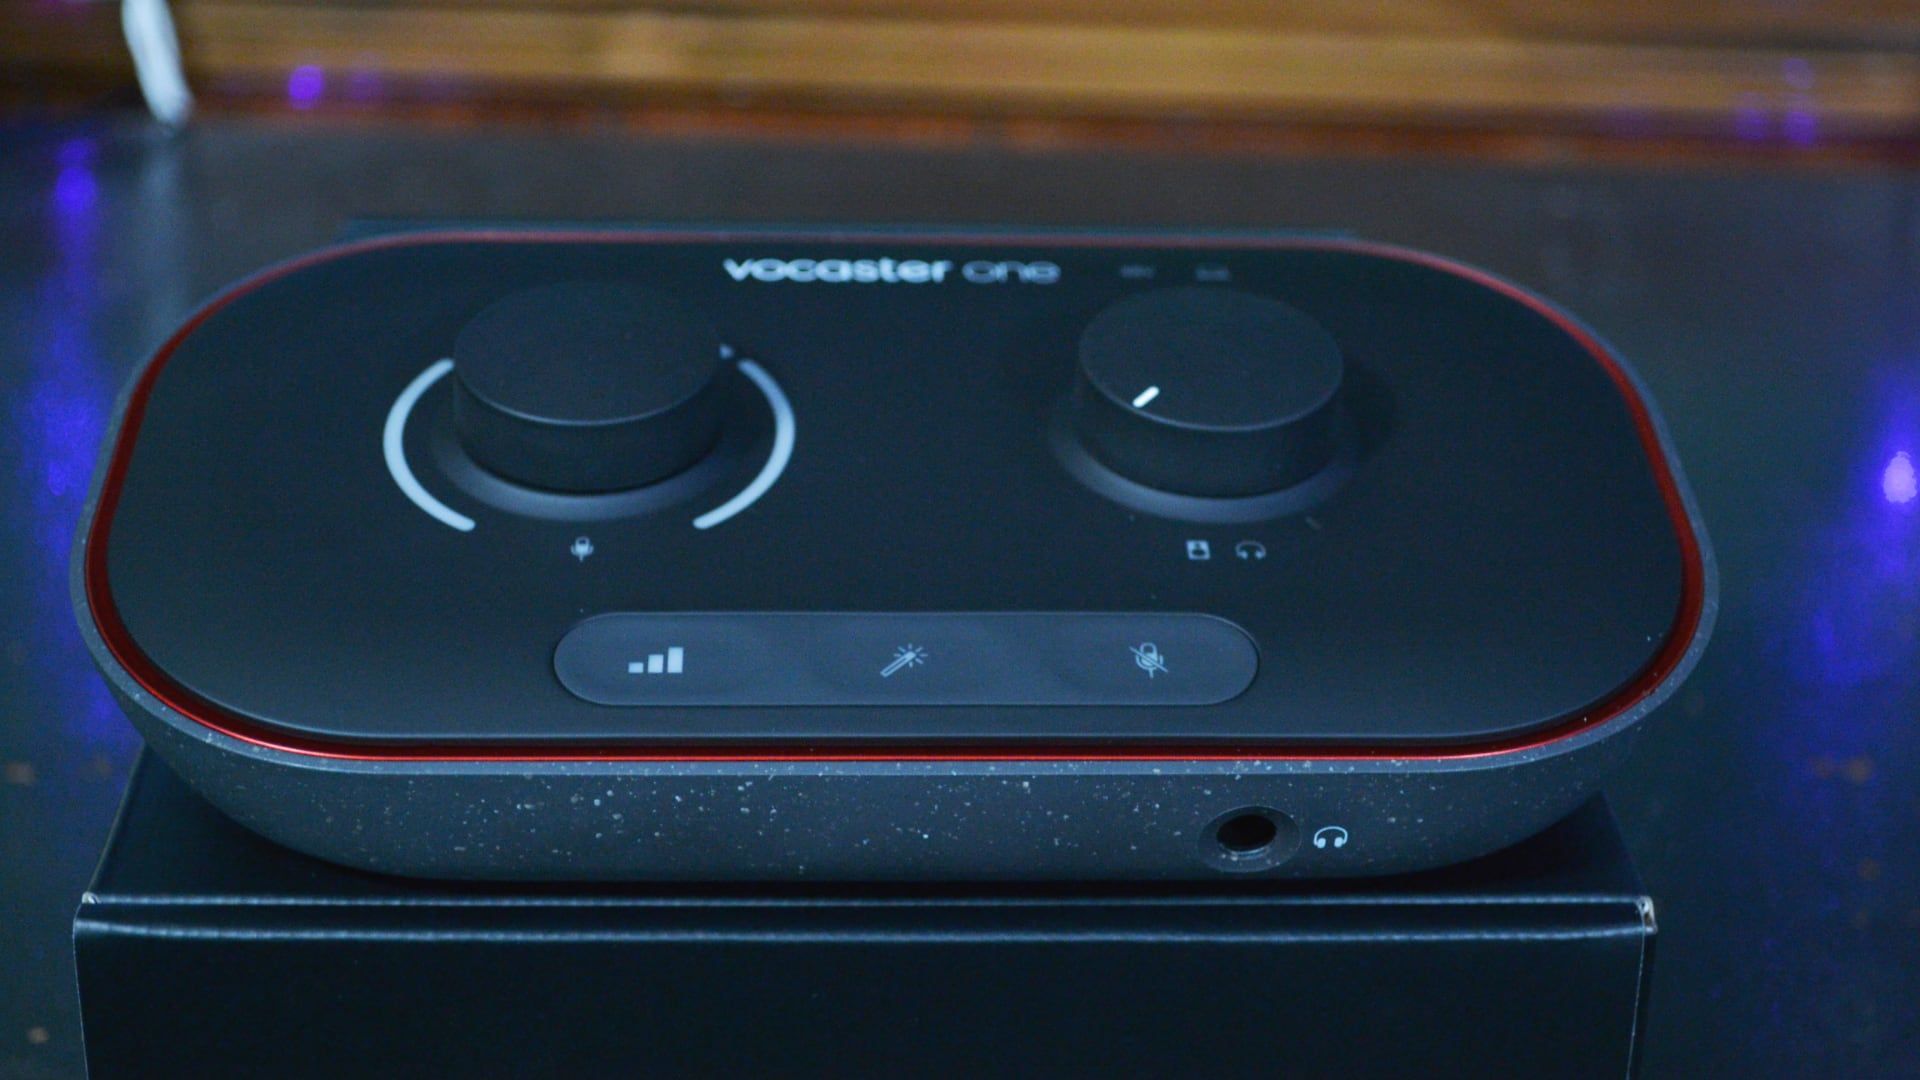 Focusrite Vocaster One front view